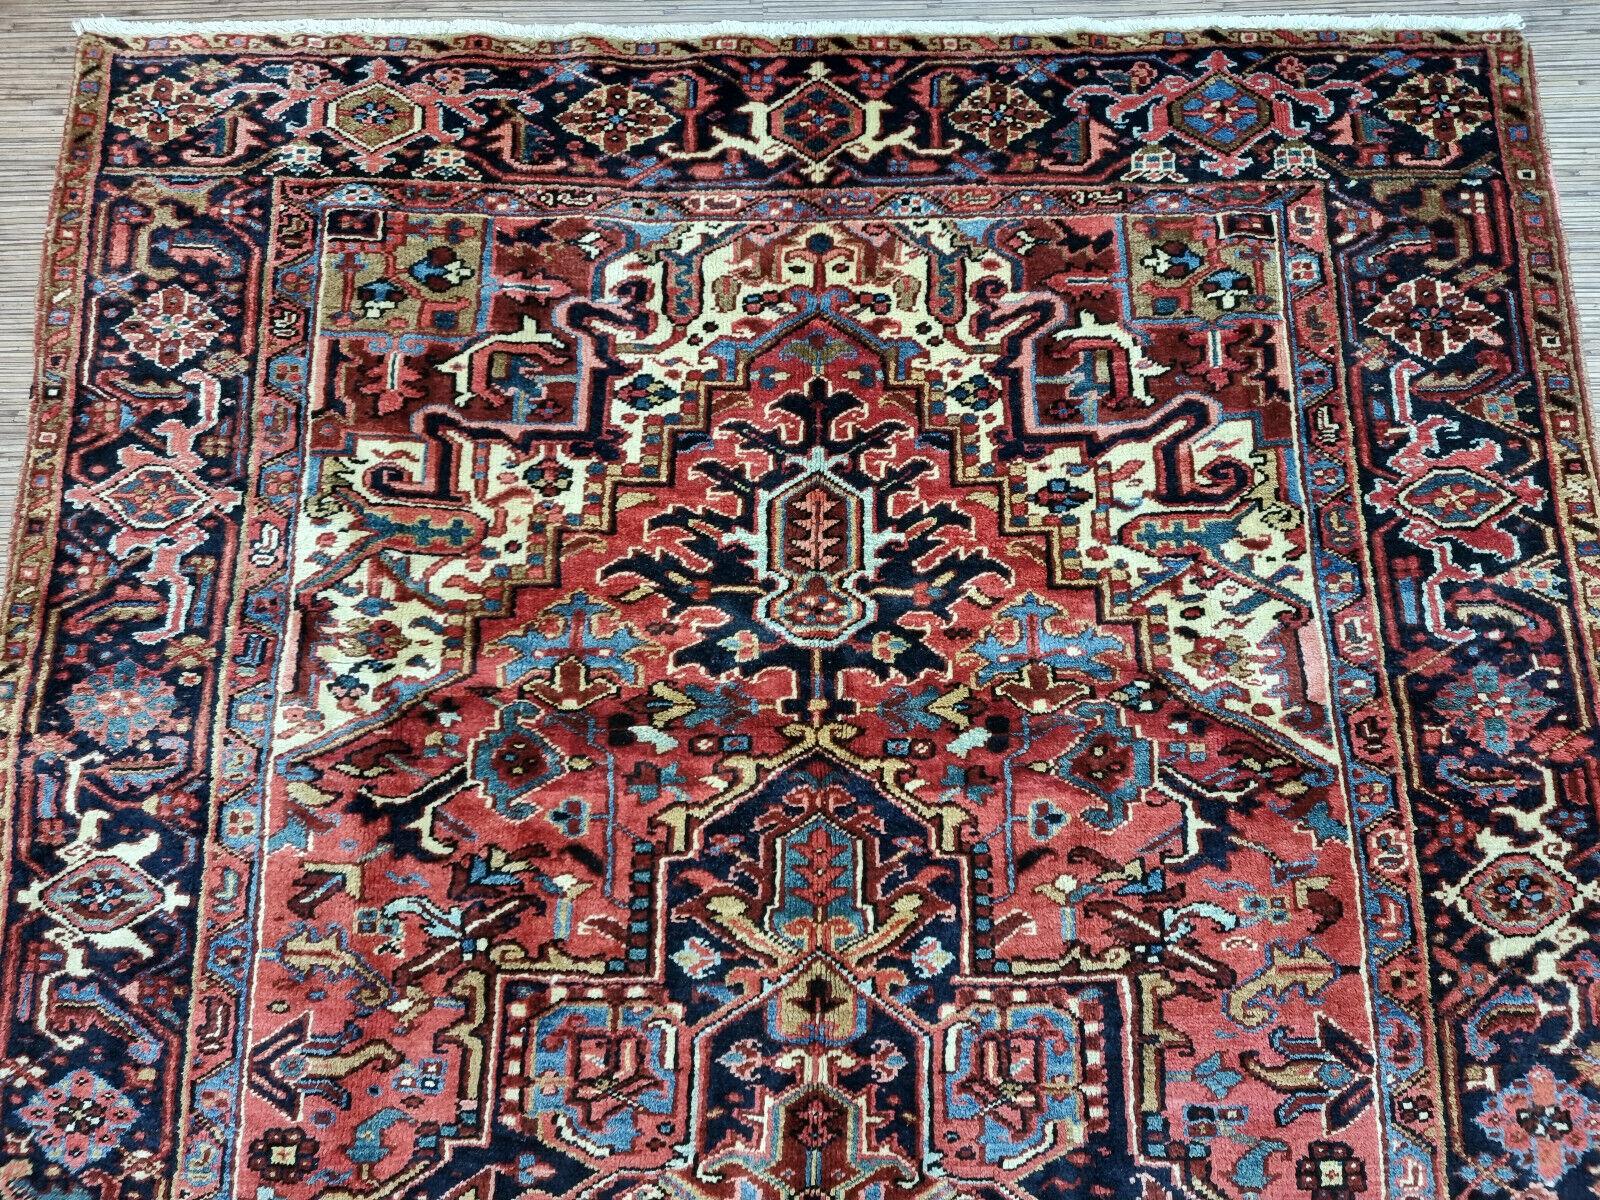 Early 20th Century Handmade Antique Persian Style Heriz Rug 5.5' x 8.8', 1920s - 1D123 For Sale